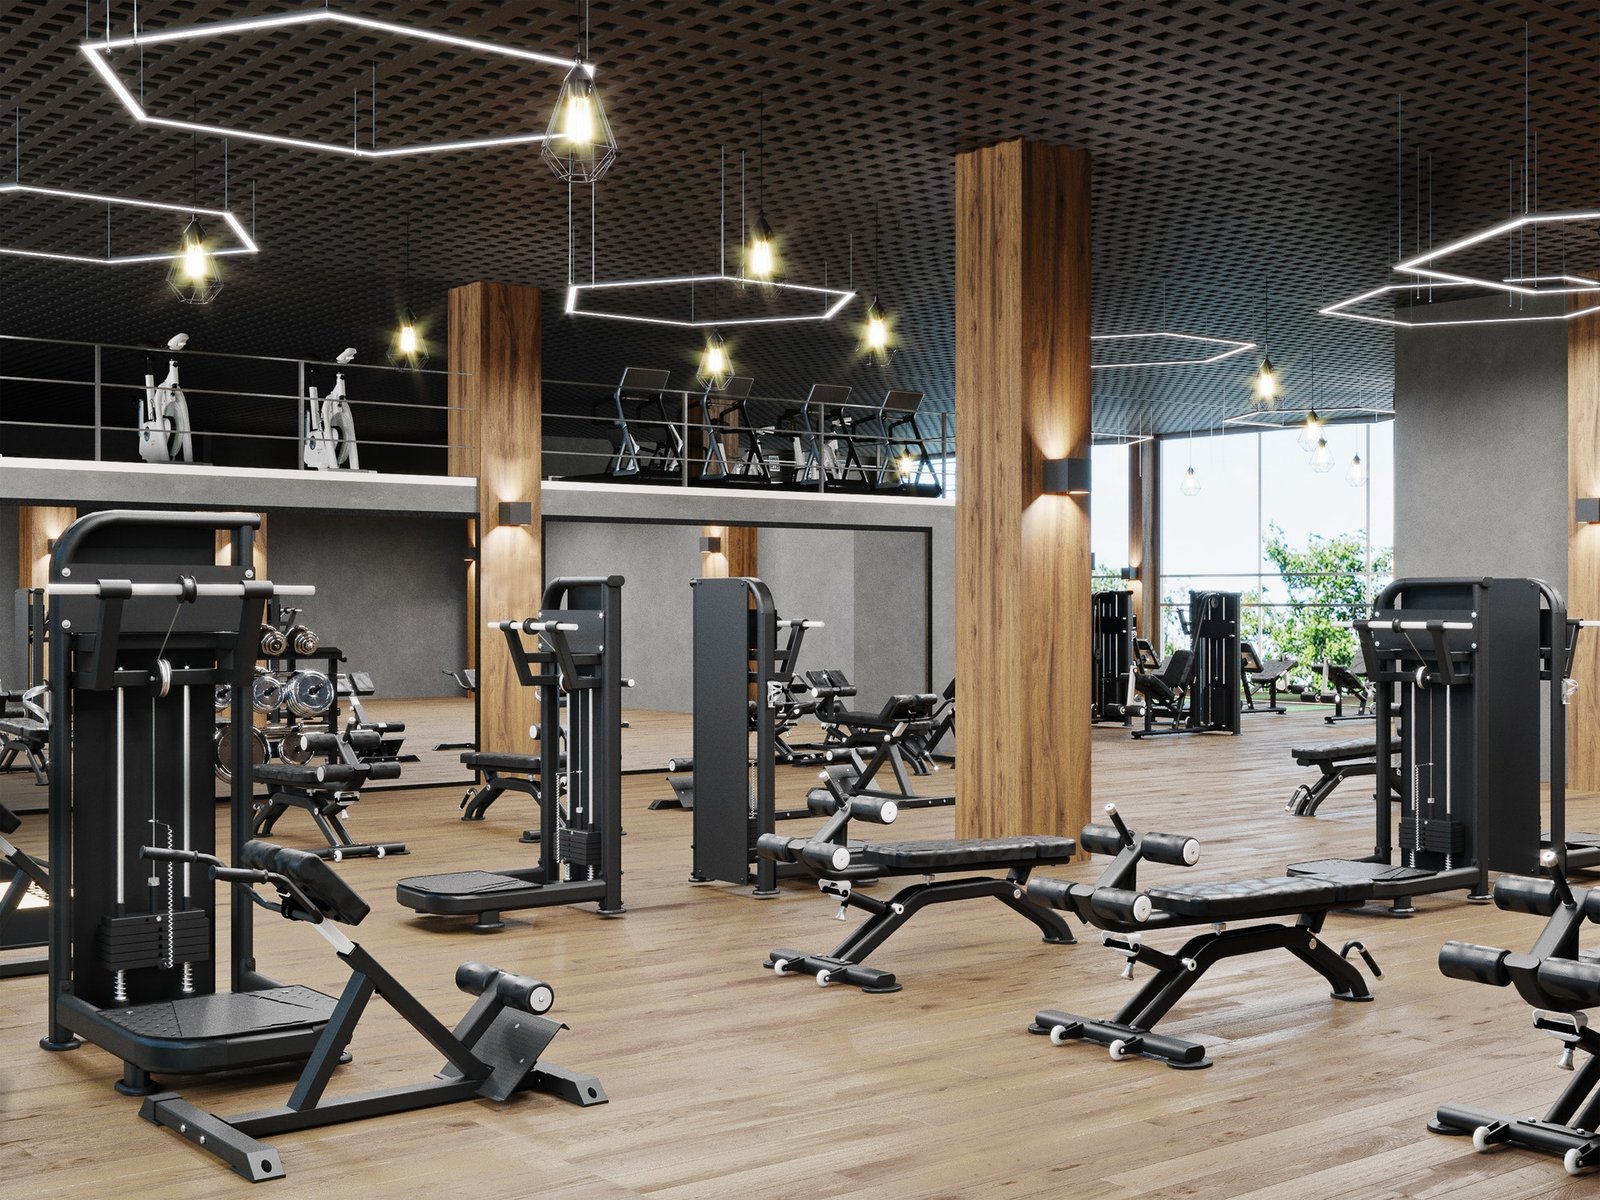 modern-gym-interior-with-sport-and-fitness-equipment-fitness-center-interior.jpg